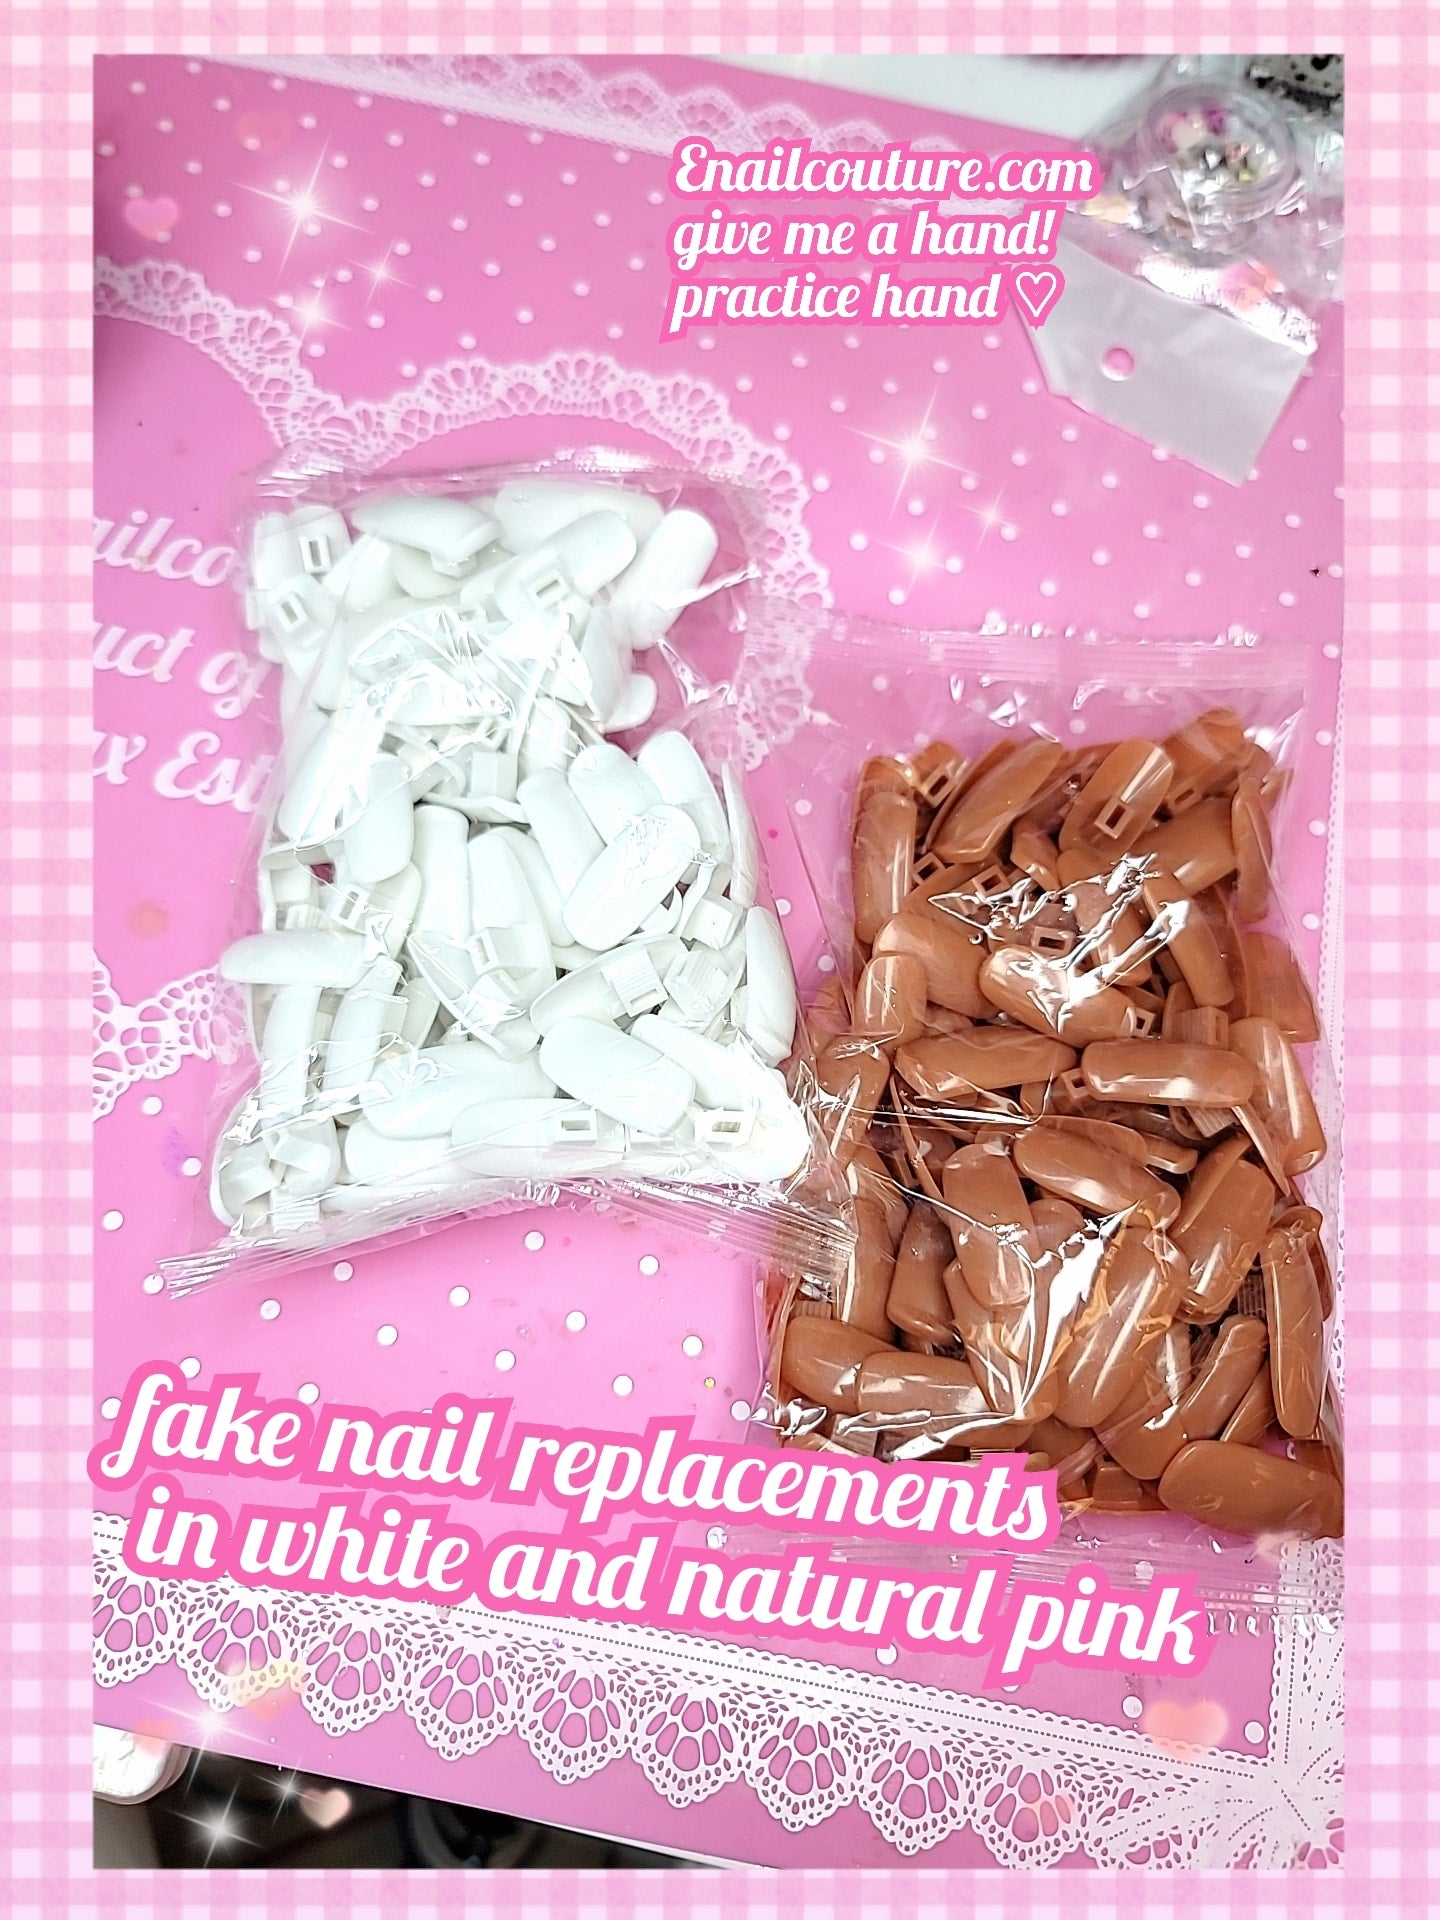 Nail Practice Training Hand Flexible Fake Hand With 100pcs Fake